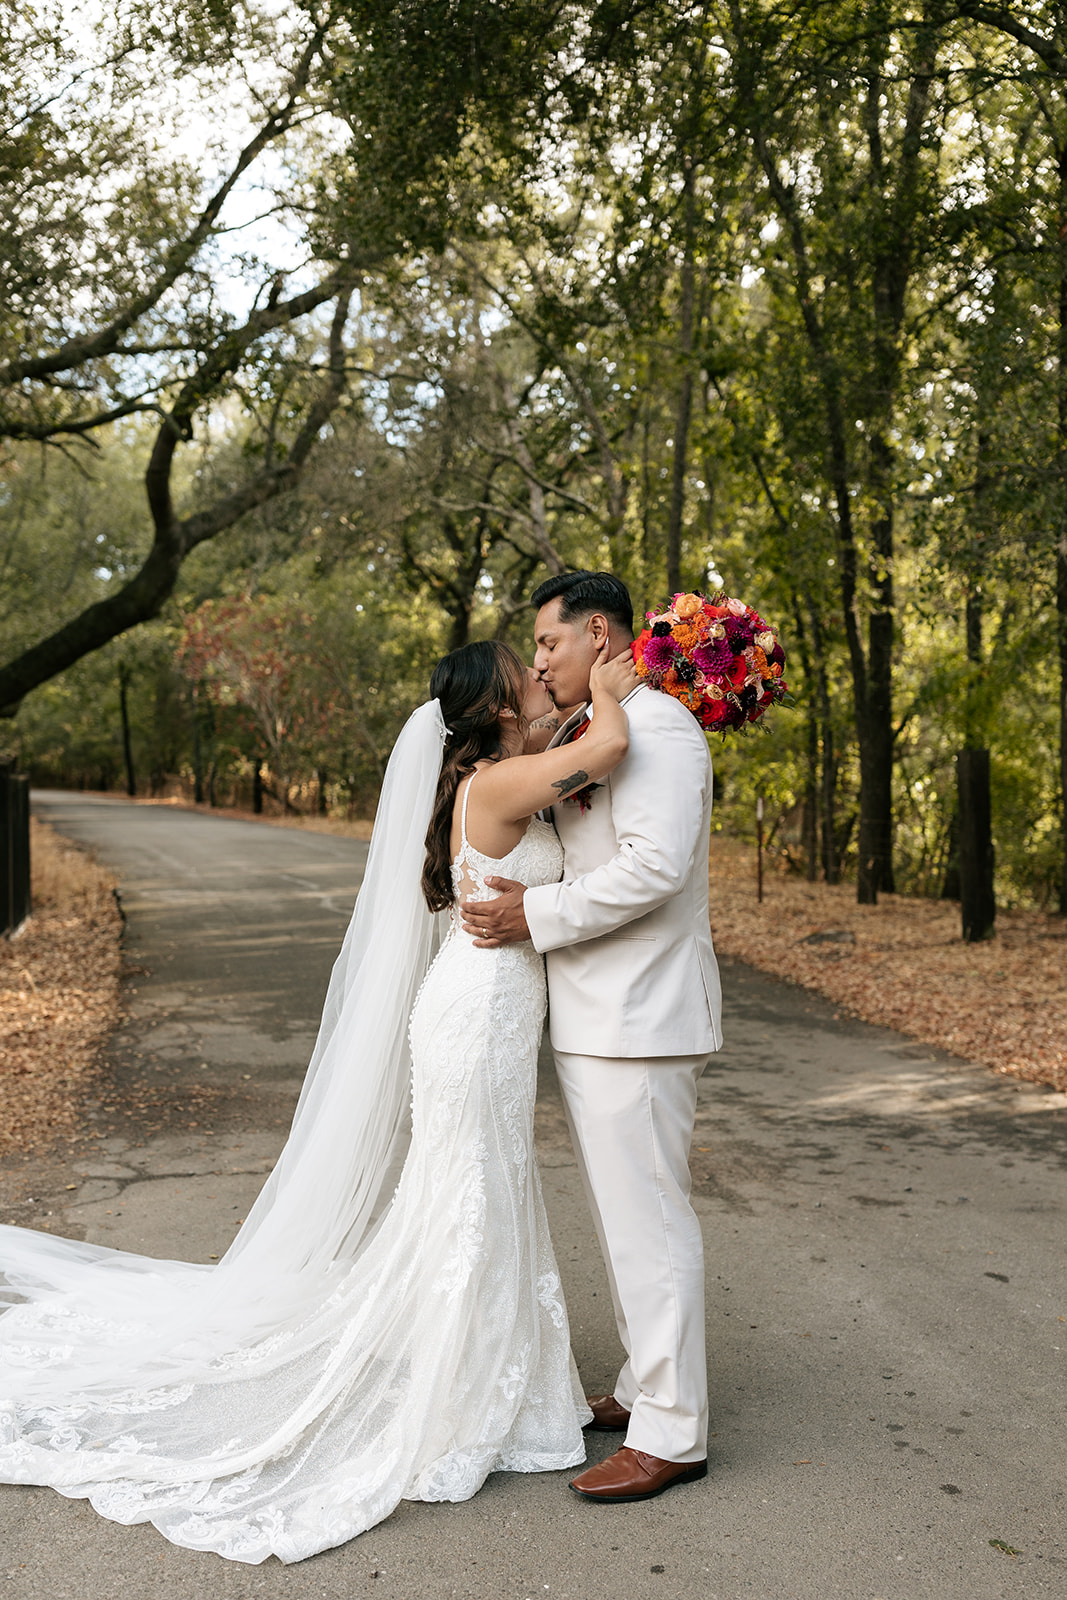 sacramento california backlyard wedding norcal bride and groom romantic pictures bride and groom poses ideas forest pics